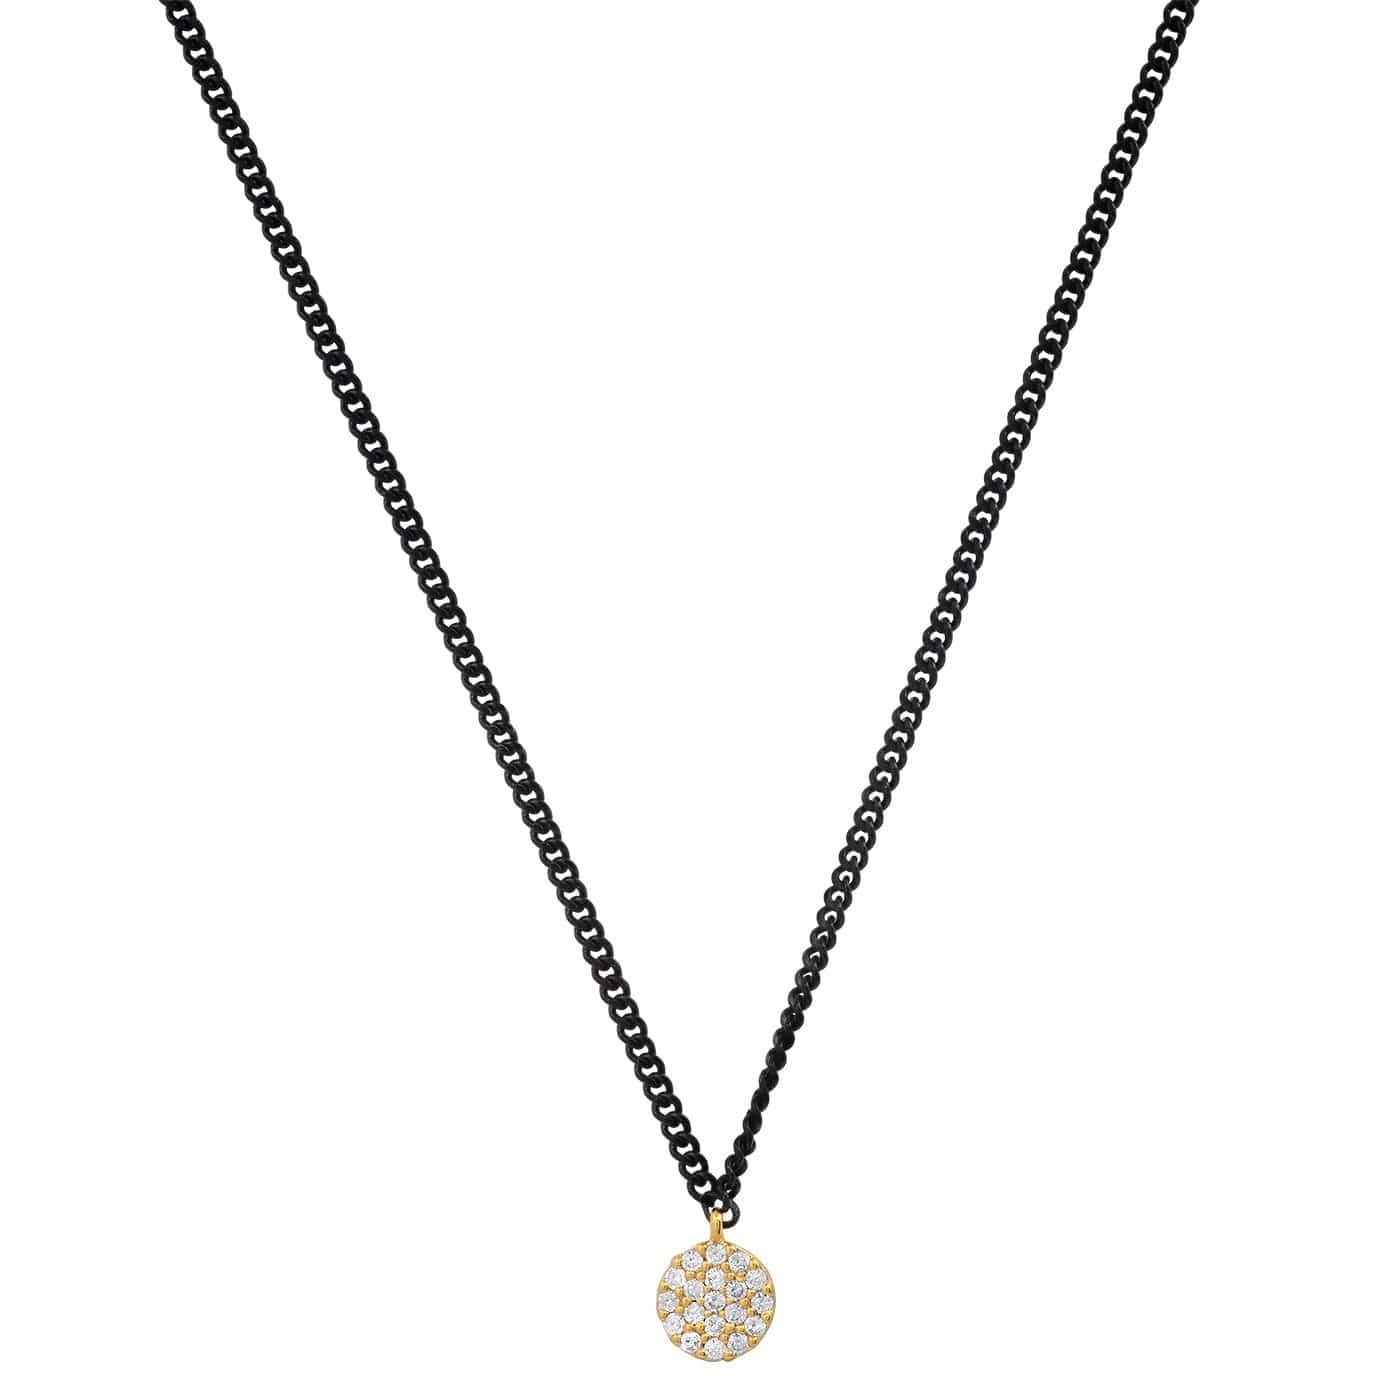 TAI JEWELRY Necklace Black Cable Chain with Gold Pave CZ Disc